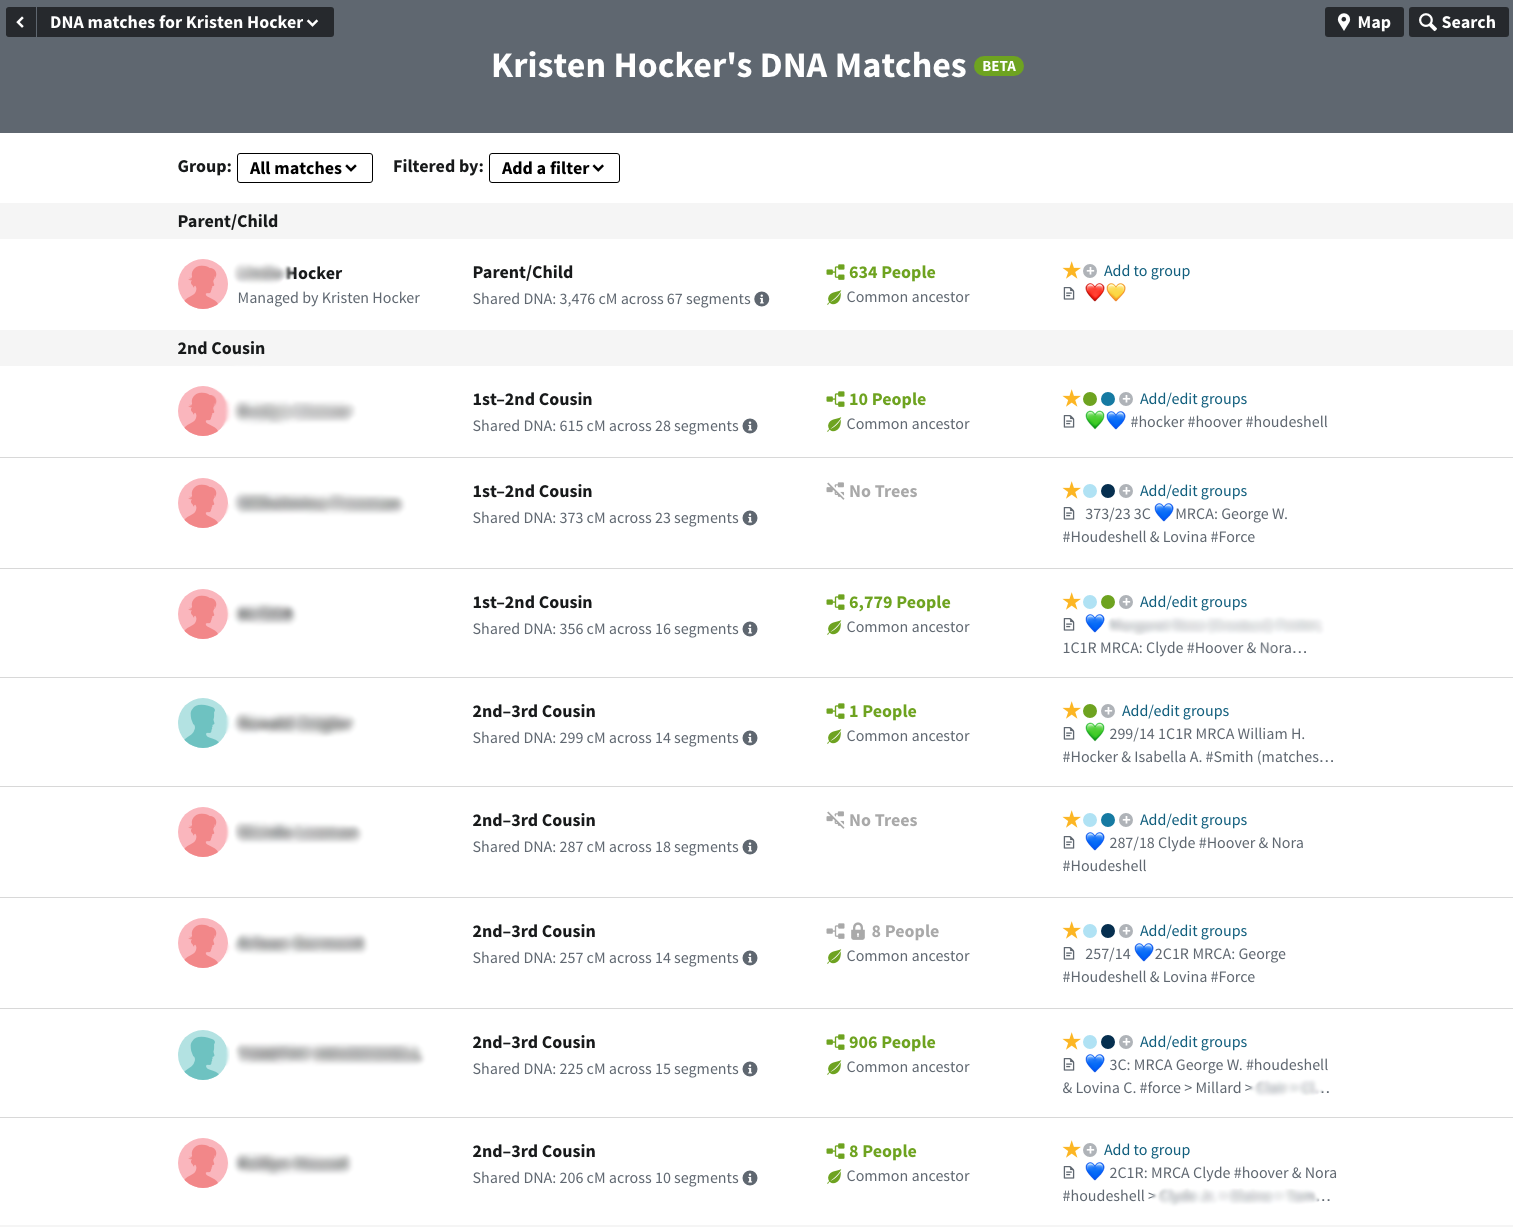 AncestryDNA's New Matches page